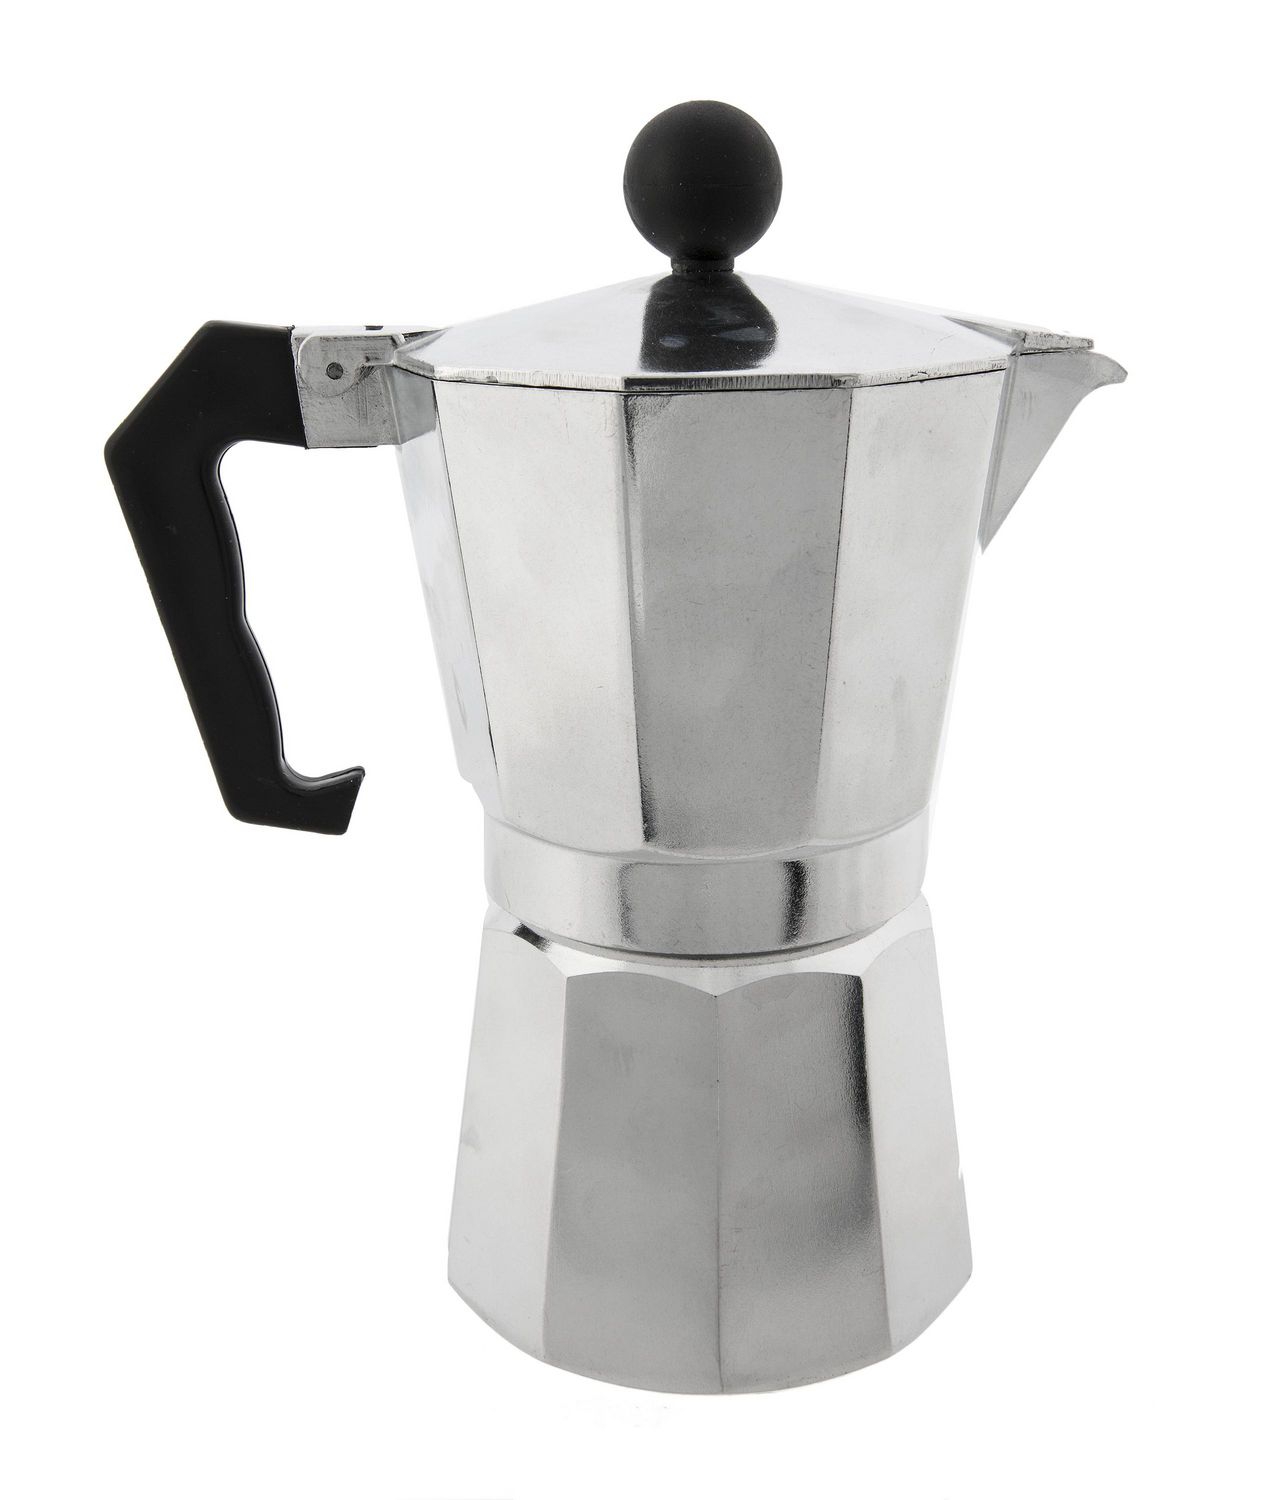 Bialetti - New Venus Induction, Stovetop Coffee Maker, Suitable for all  Types of Hobs, Stainless Steel, 10 Cups (15.5 Oz), Silver